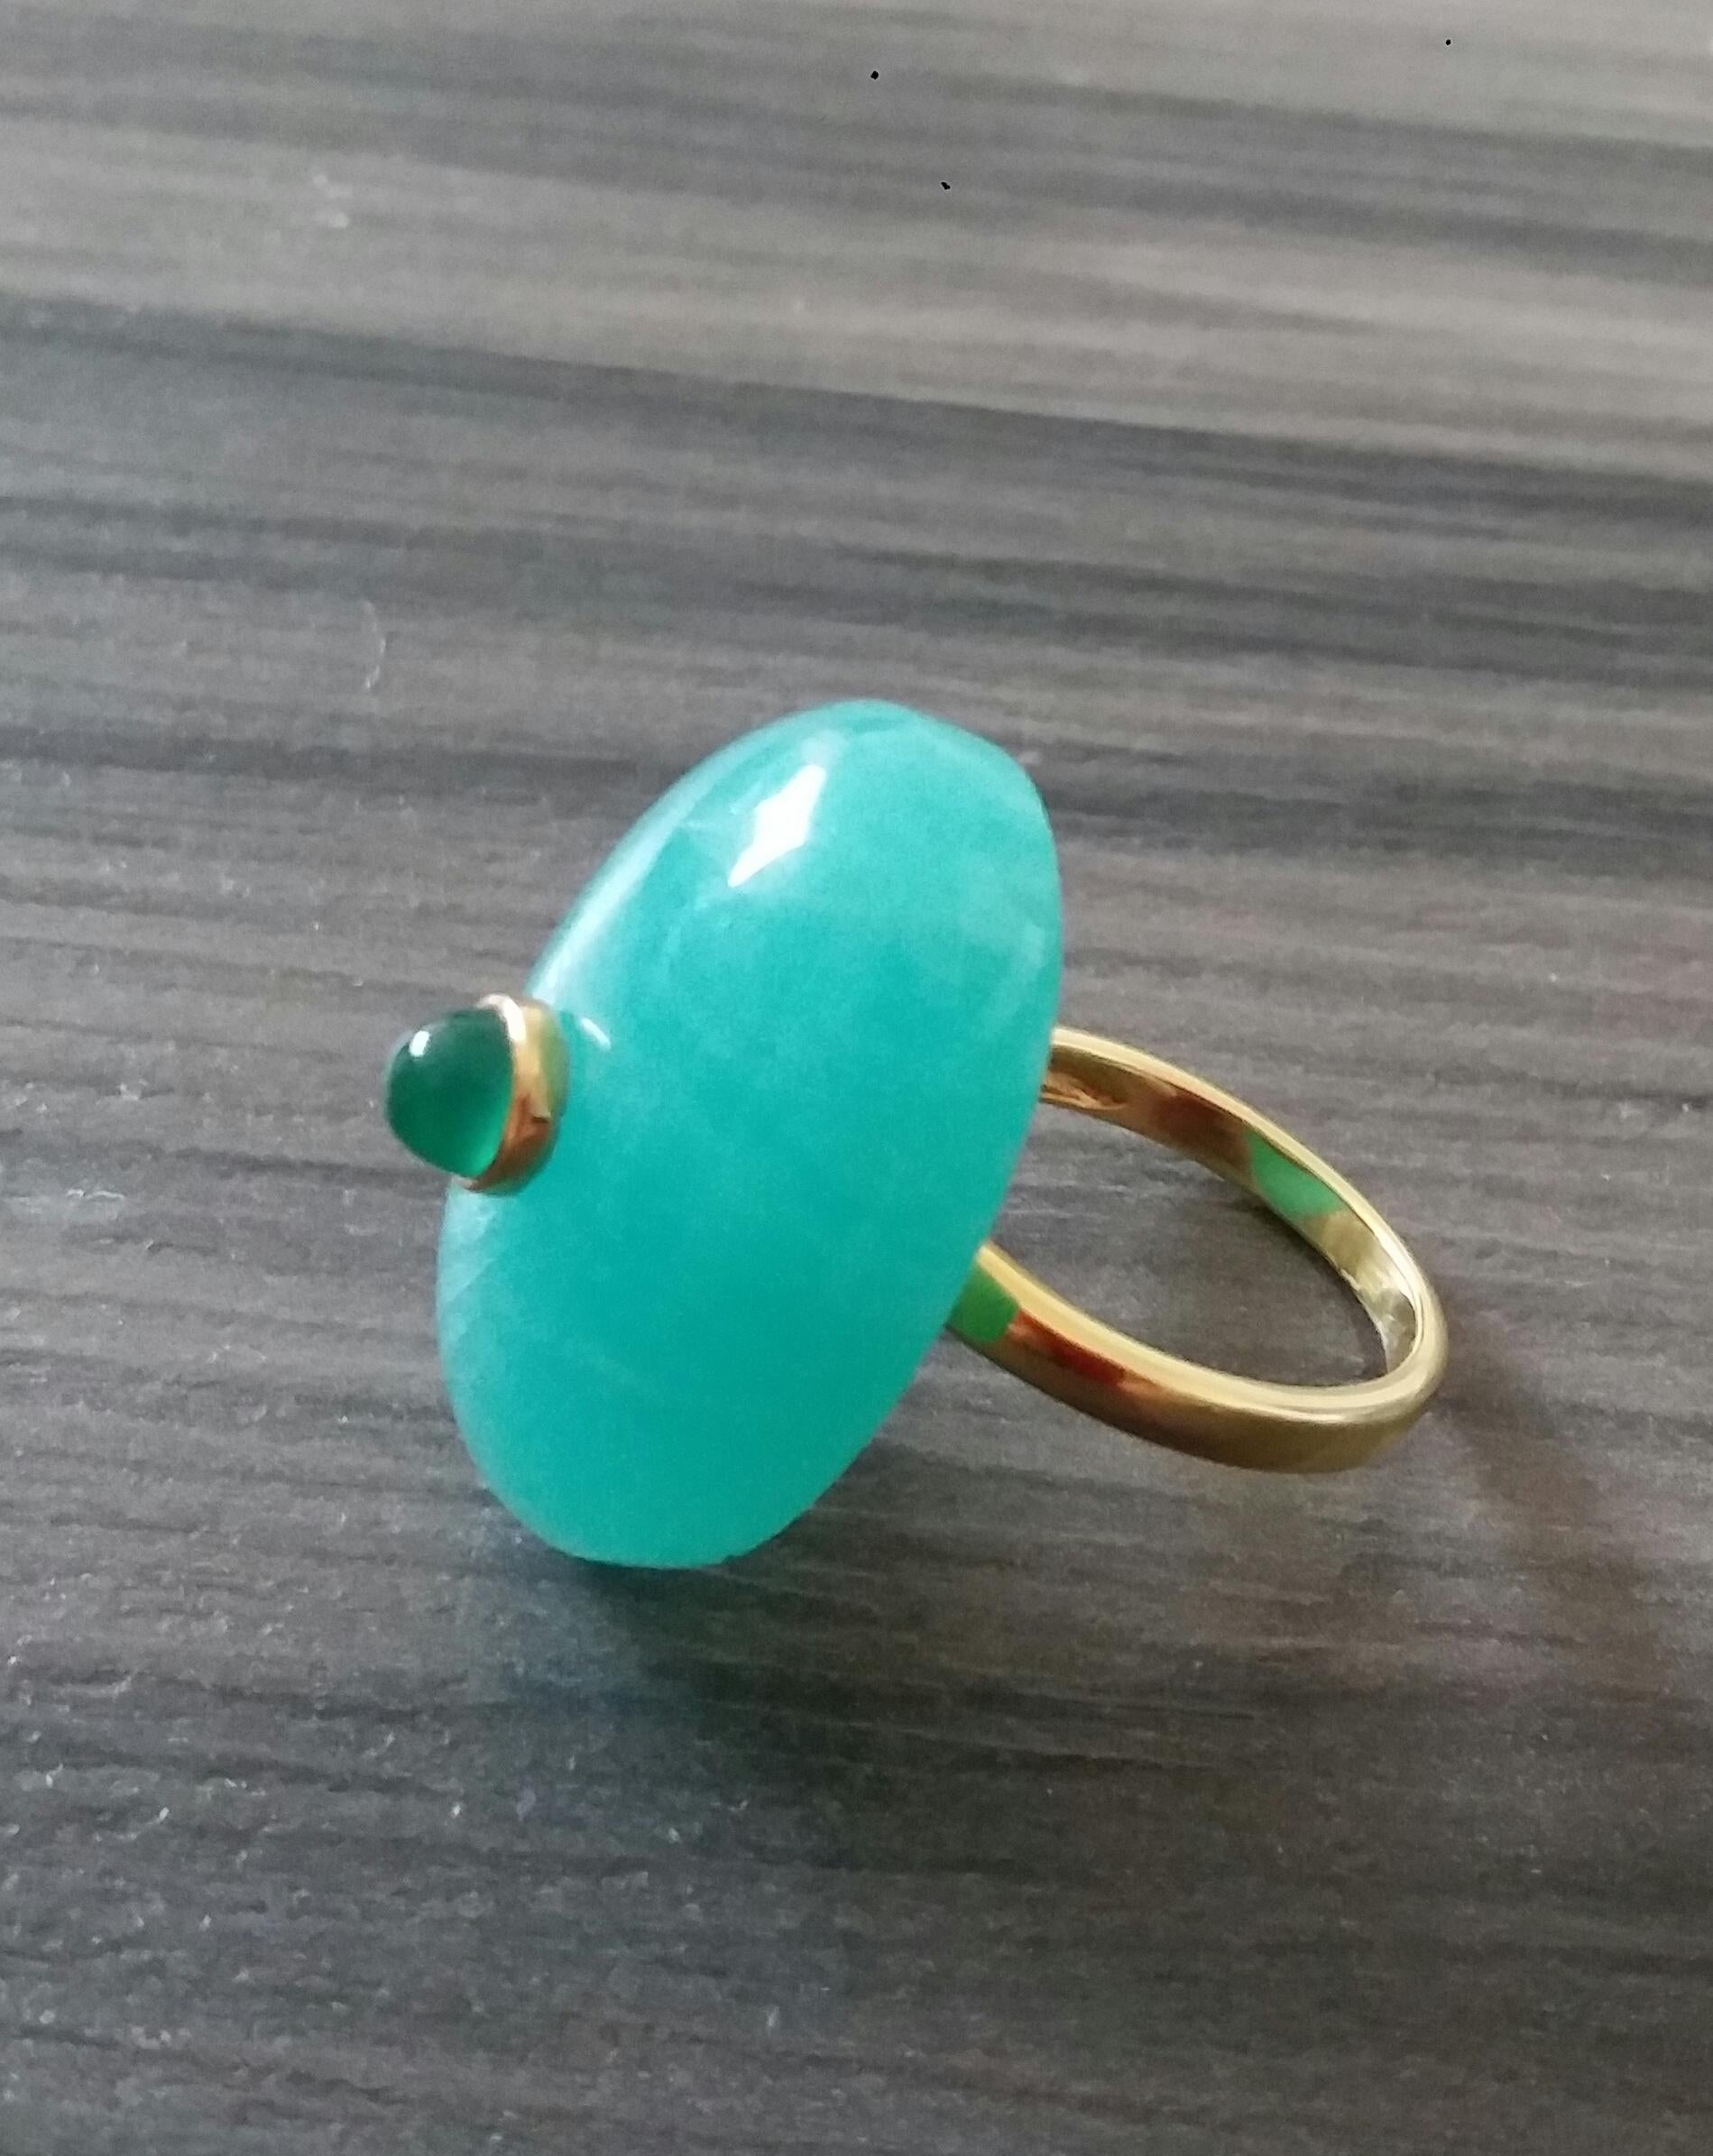 Unique ring with a Big Oval Shape Natural Extra Quality  Amazonite  Cab measuring 28 mm. x 20 mm x 9 mm. with a Round Emerald Cab measuring 6 mm in diameter set in 14 kt yellow gold bezel...Ring shank is also in 14 kt  solid yellow gold now in